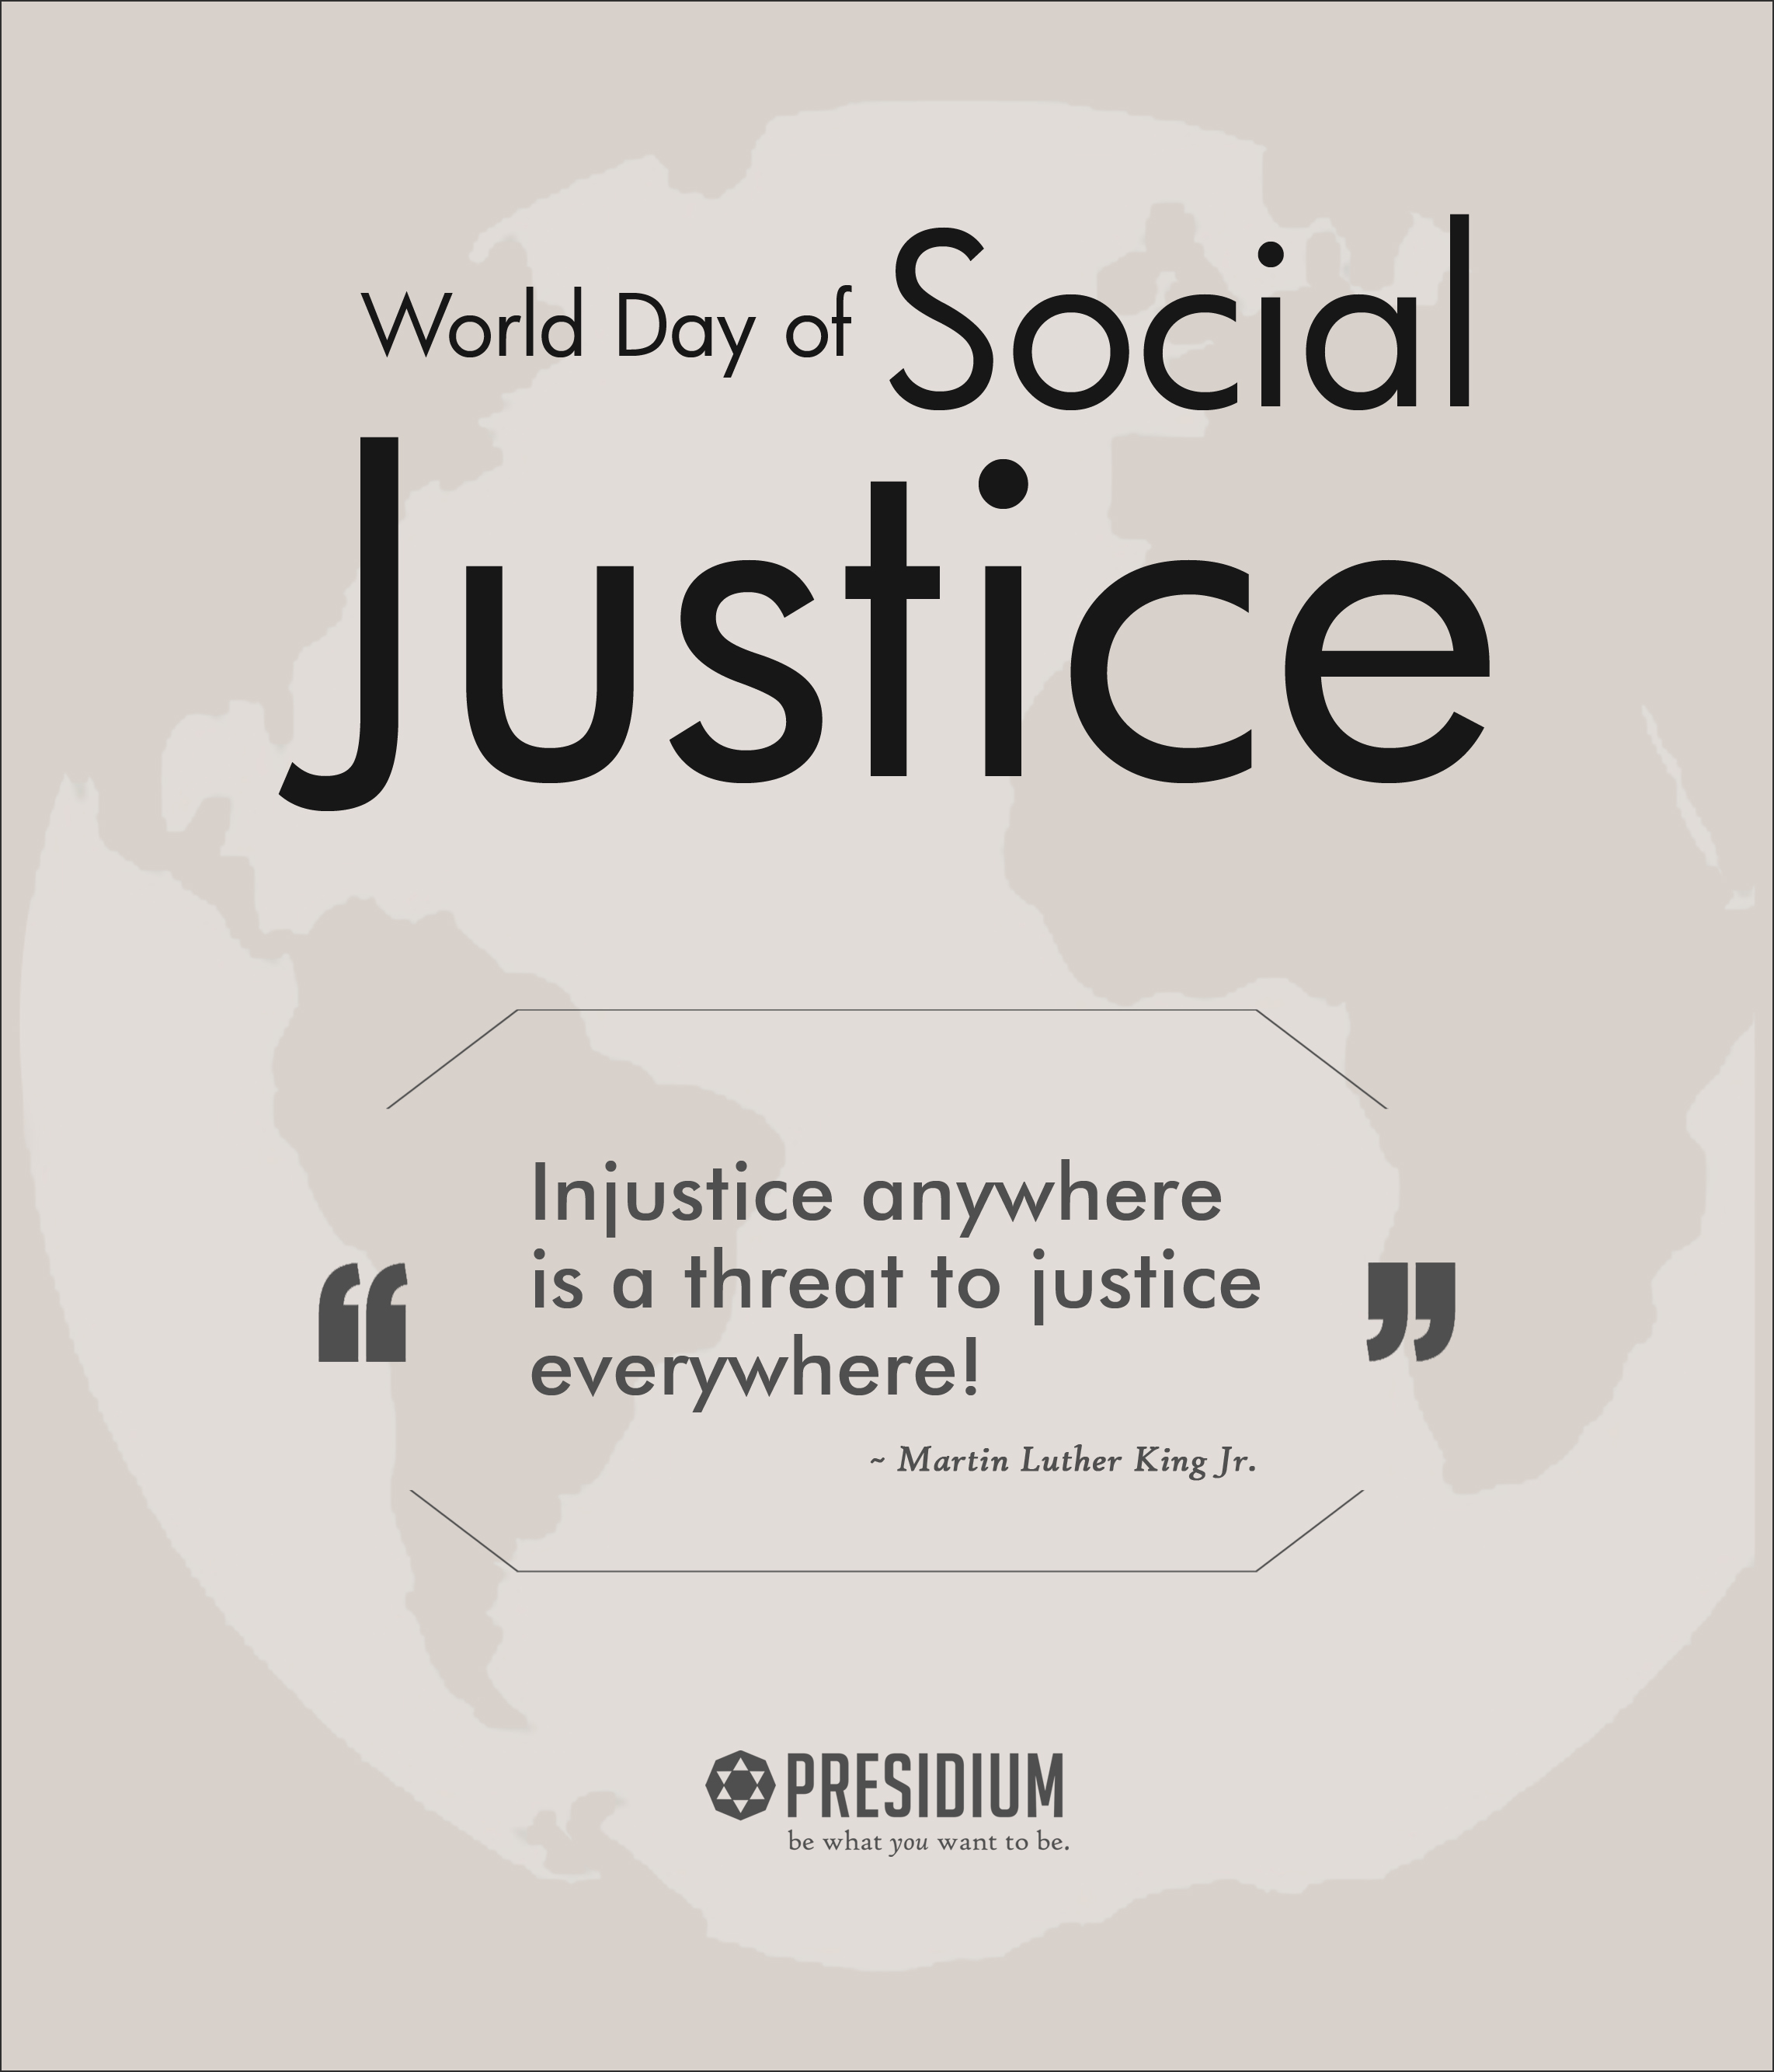 PRESIDIUM STANDS FOR ONENESS ON WORLD DAY OF SOCIAL JUSTICE